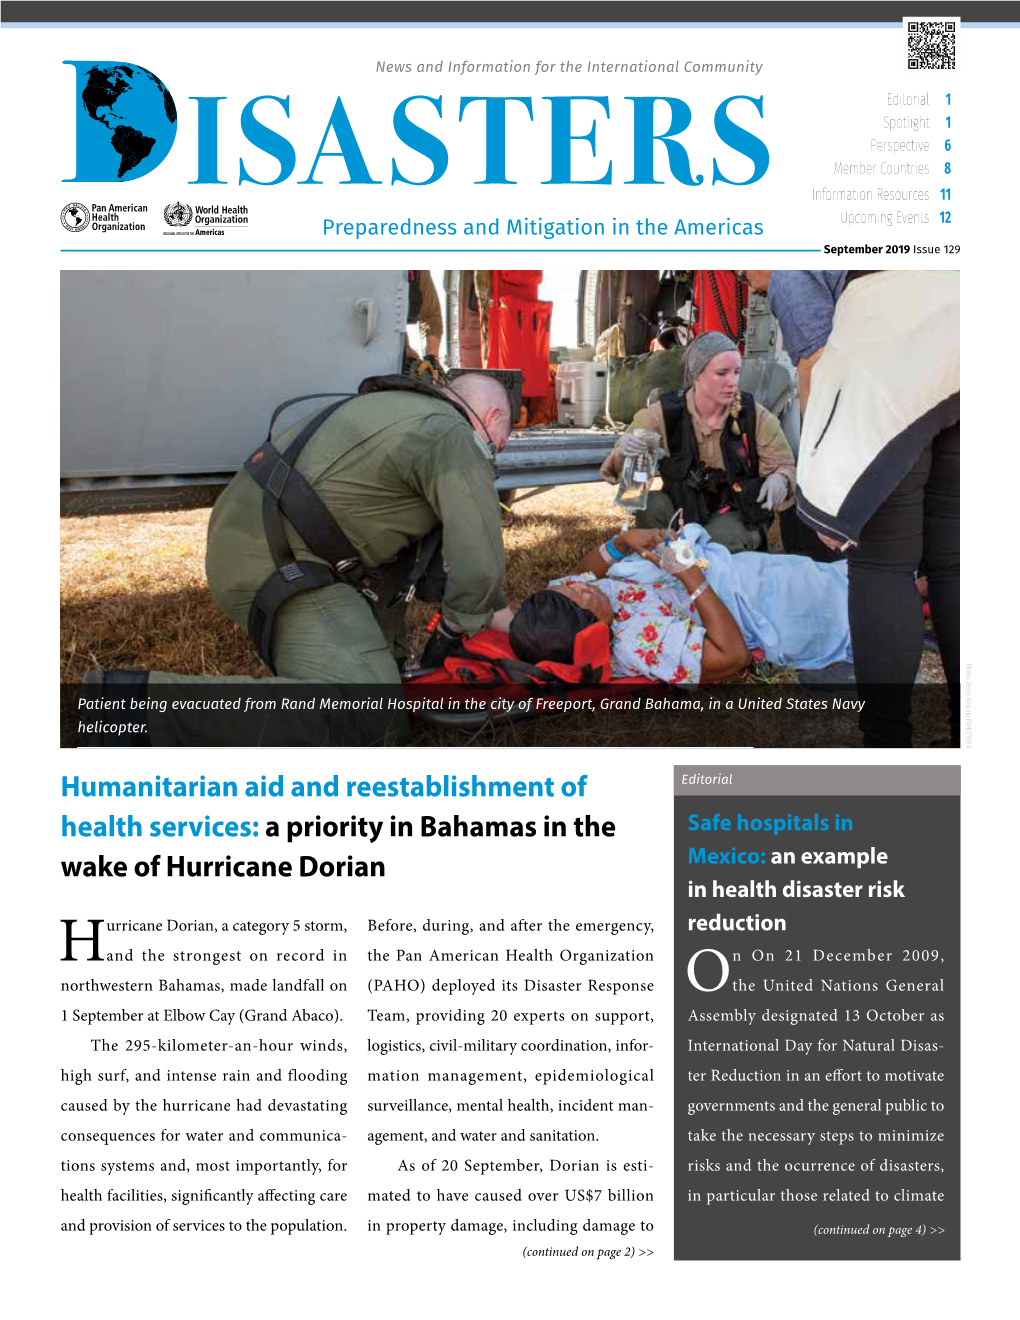 Humanitarian Aid and Reestablishment of Health Services: a Priority in Bahamas in the Wake of Hurricane Dorian